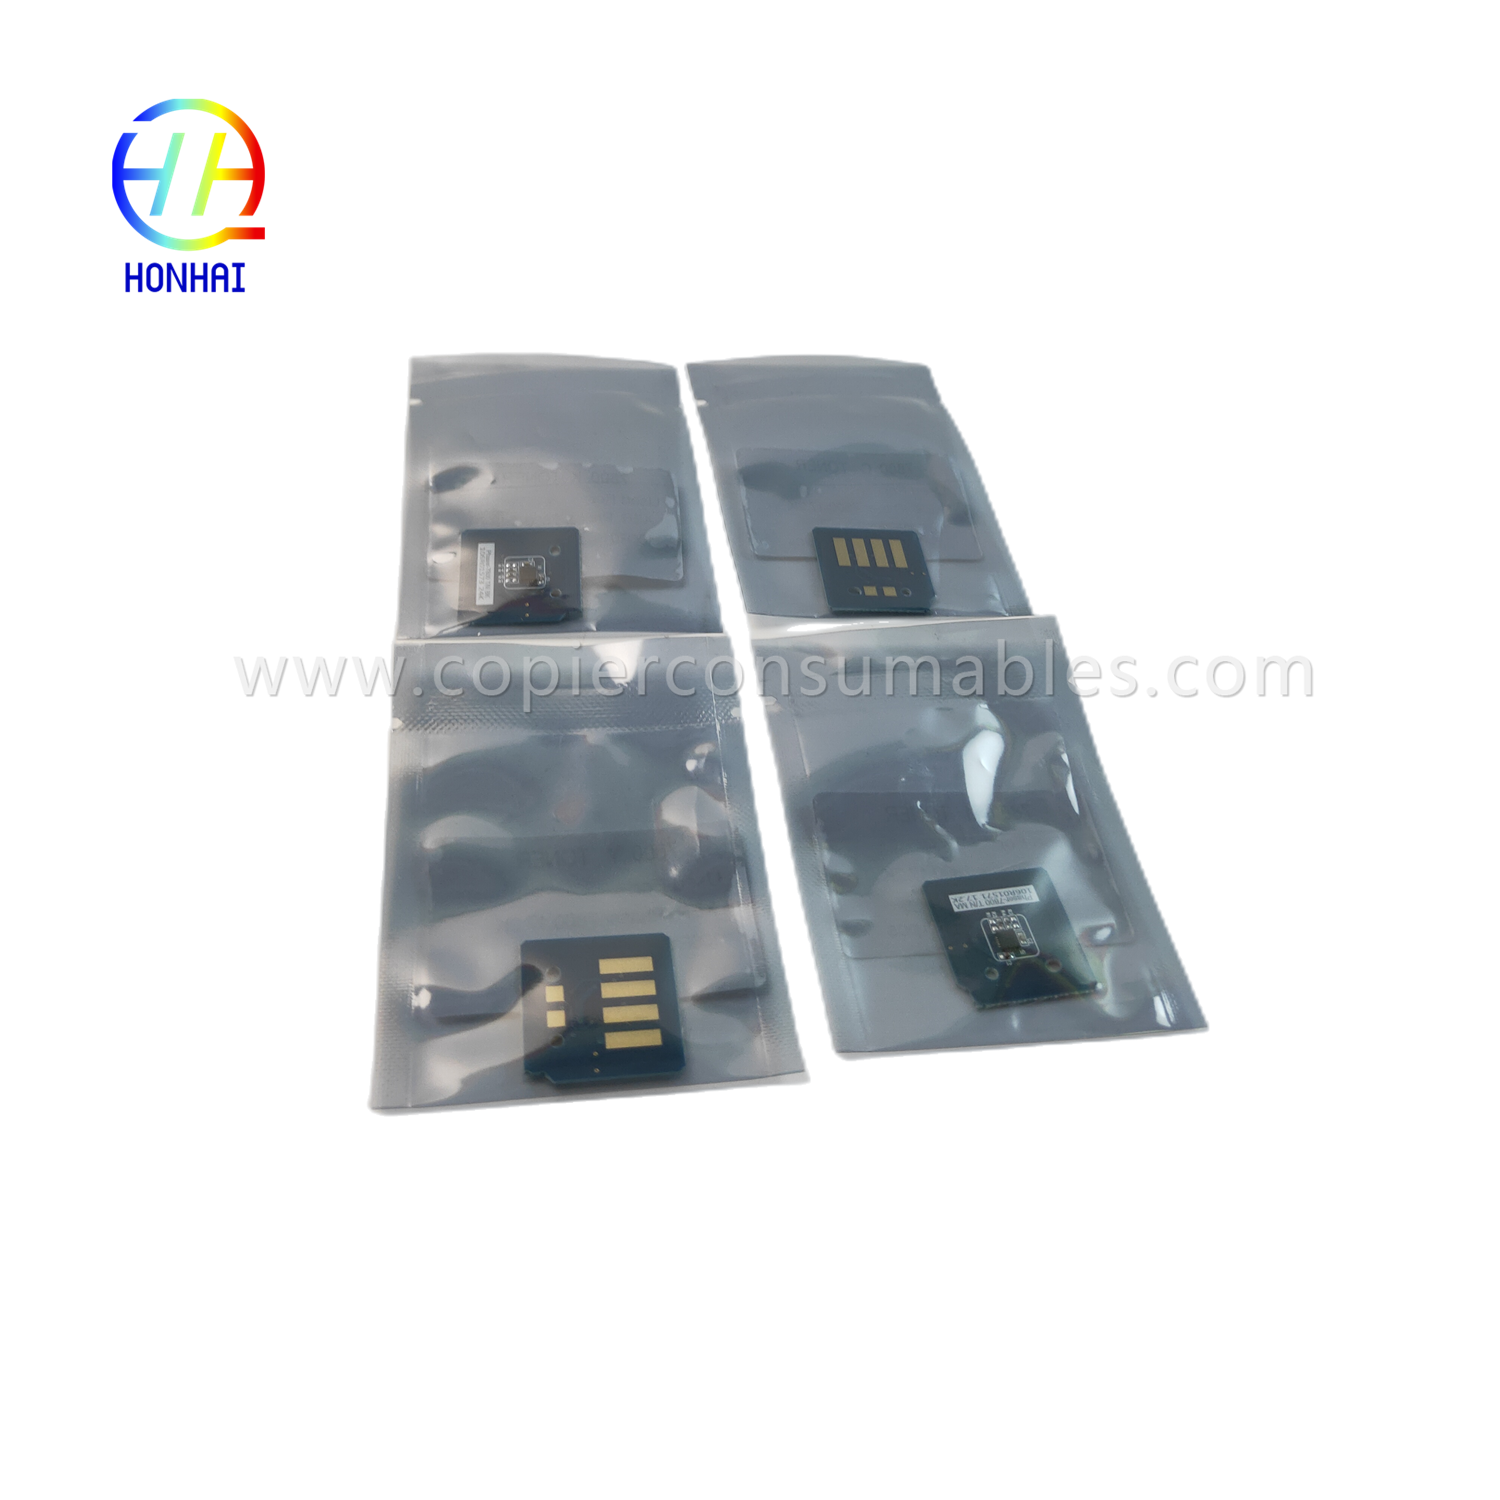 Toner Chip (set) mo Xerox Phaser 7800 106R01573 106R01570 106R01571 106R01572 Chip (1) _副本_副本